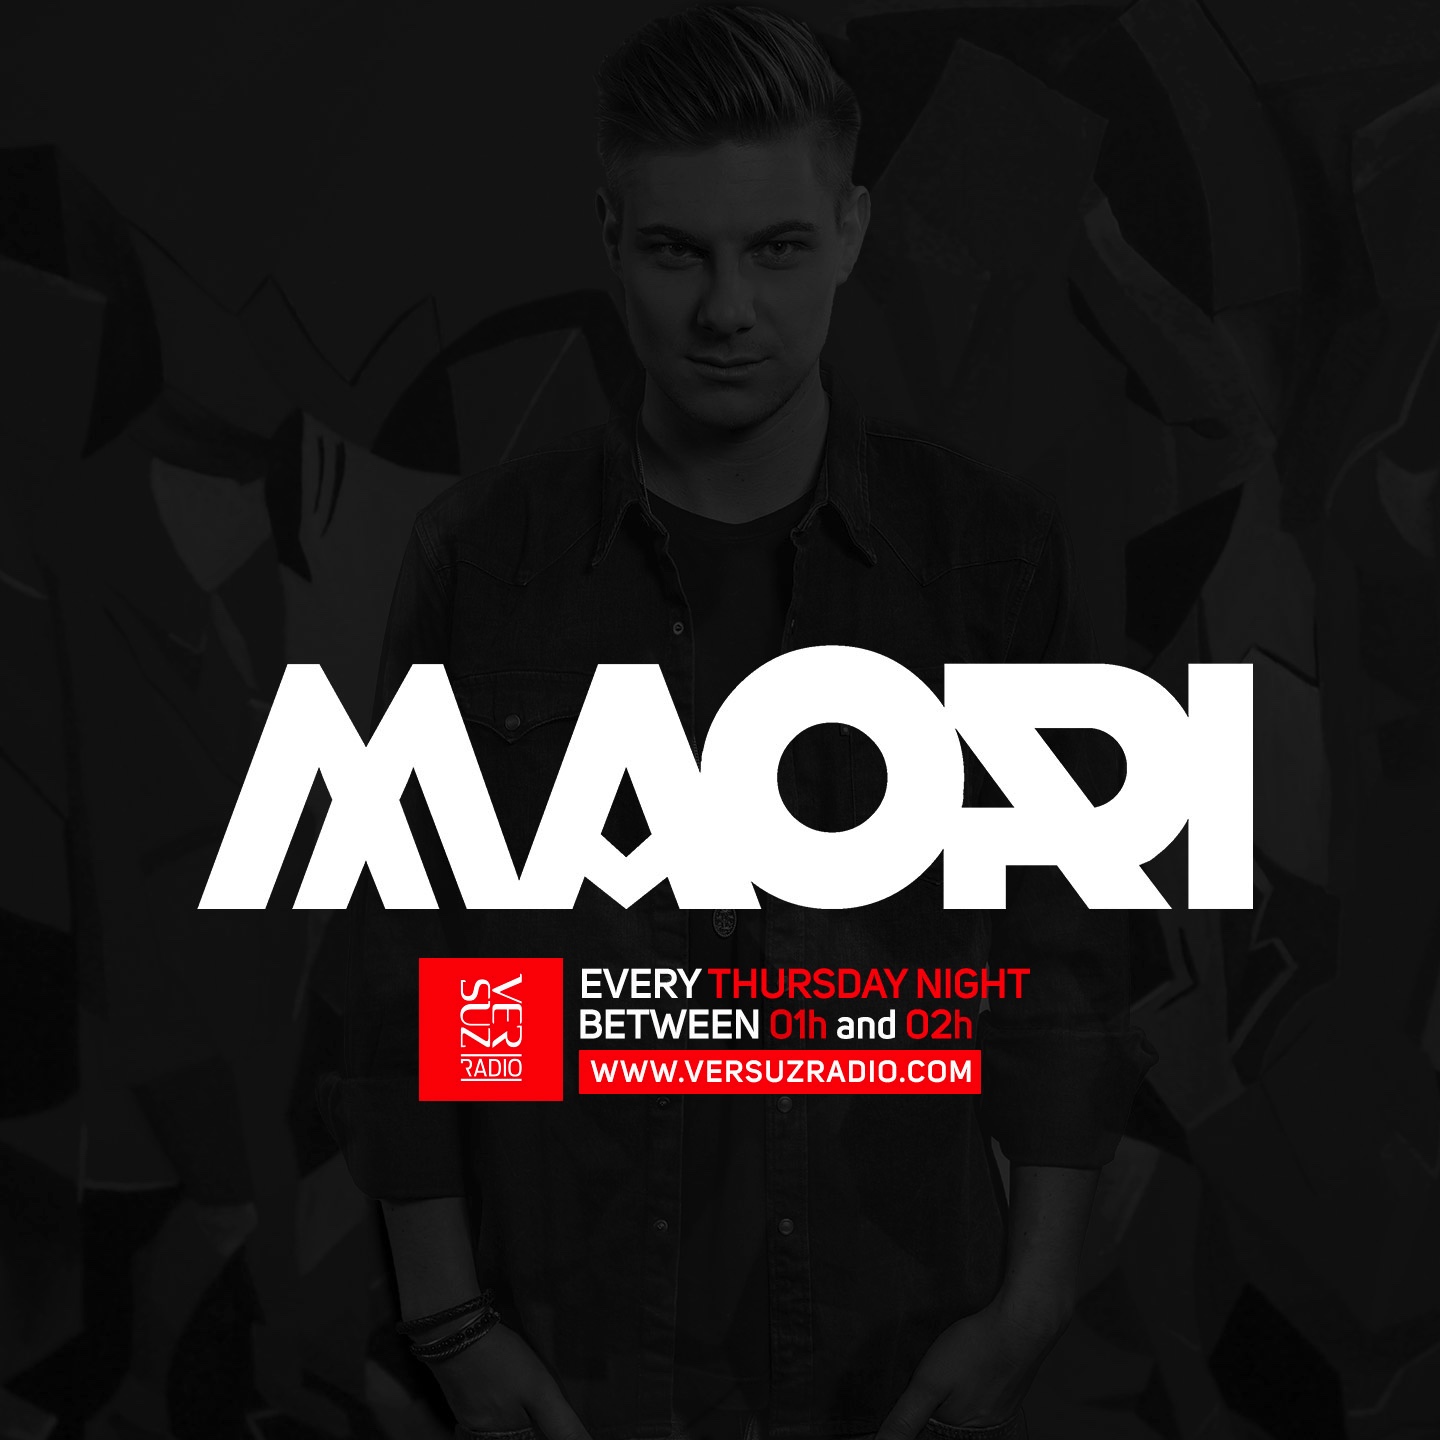 Clubhouse Radio by Maori - Episode #012